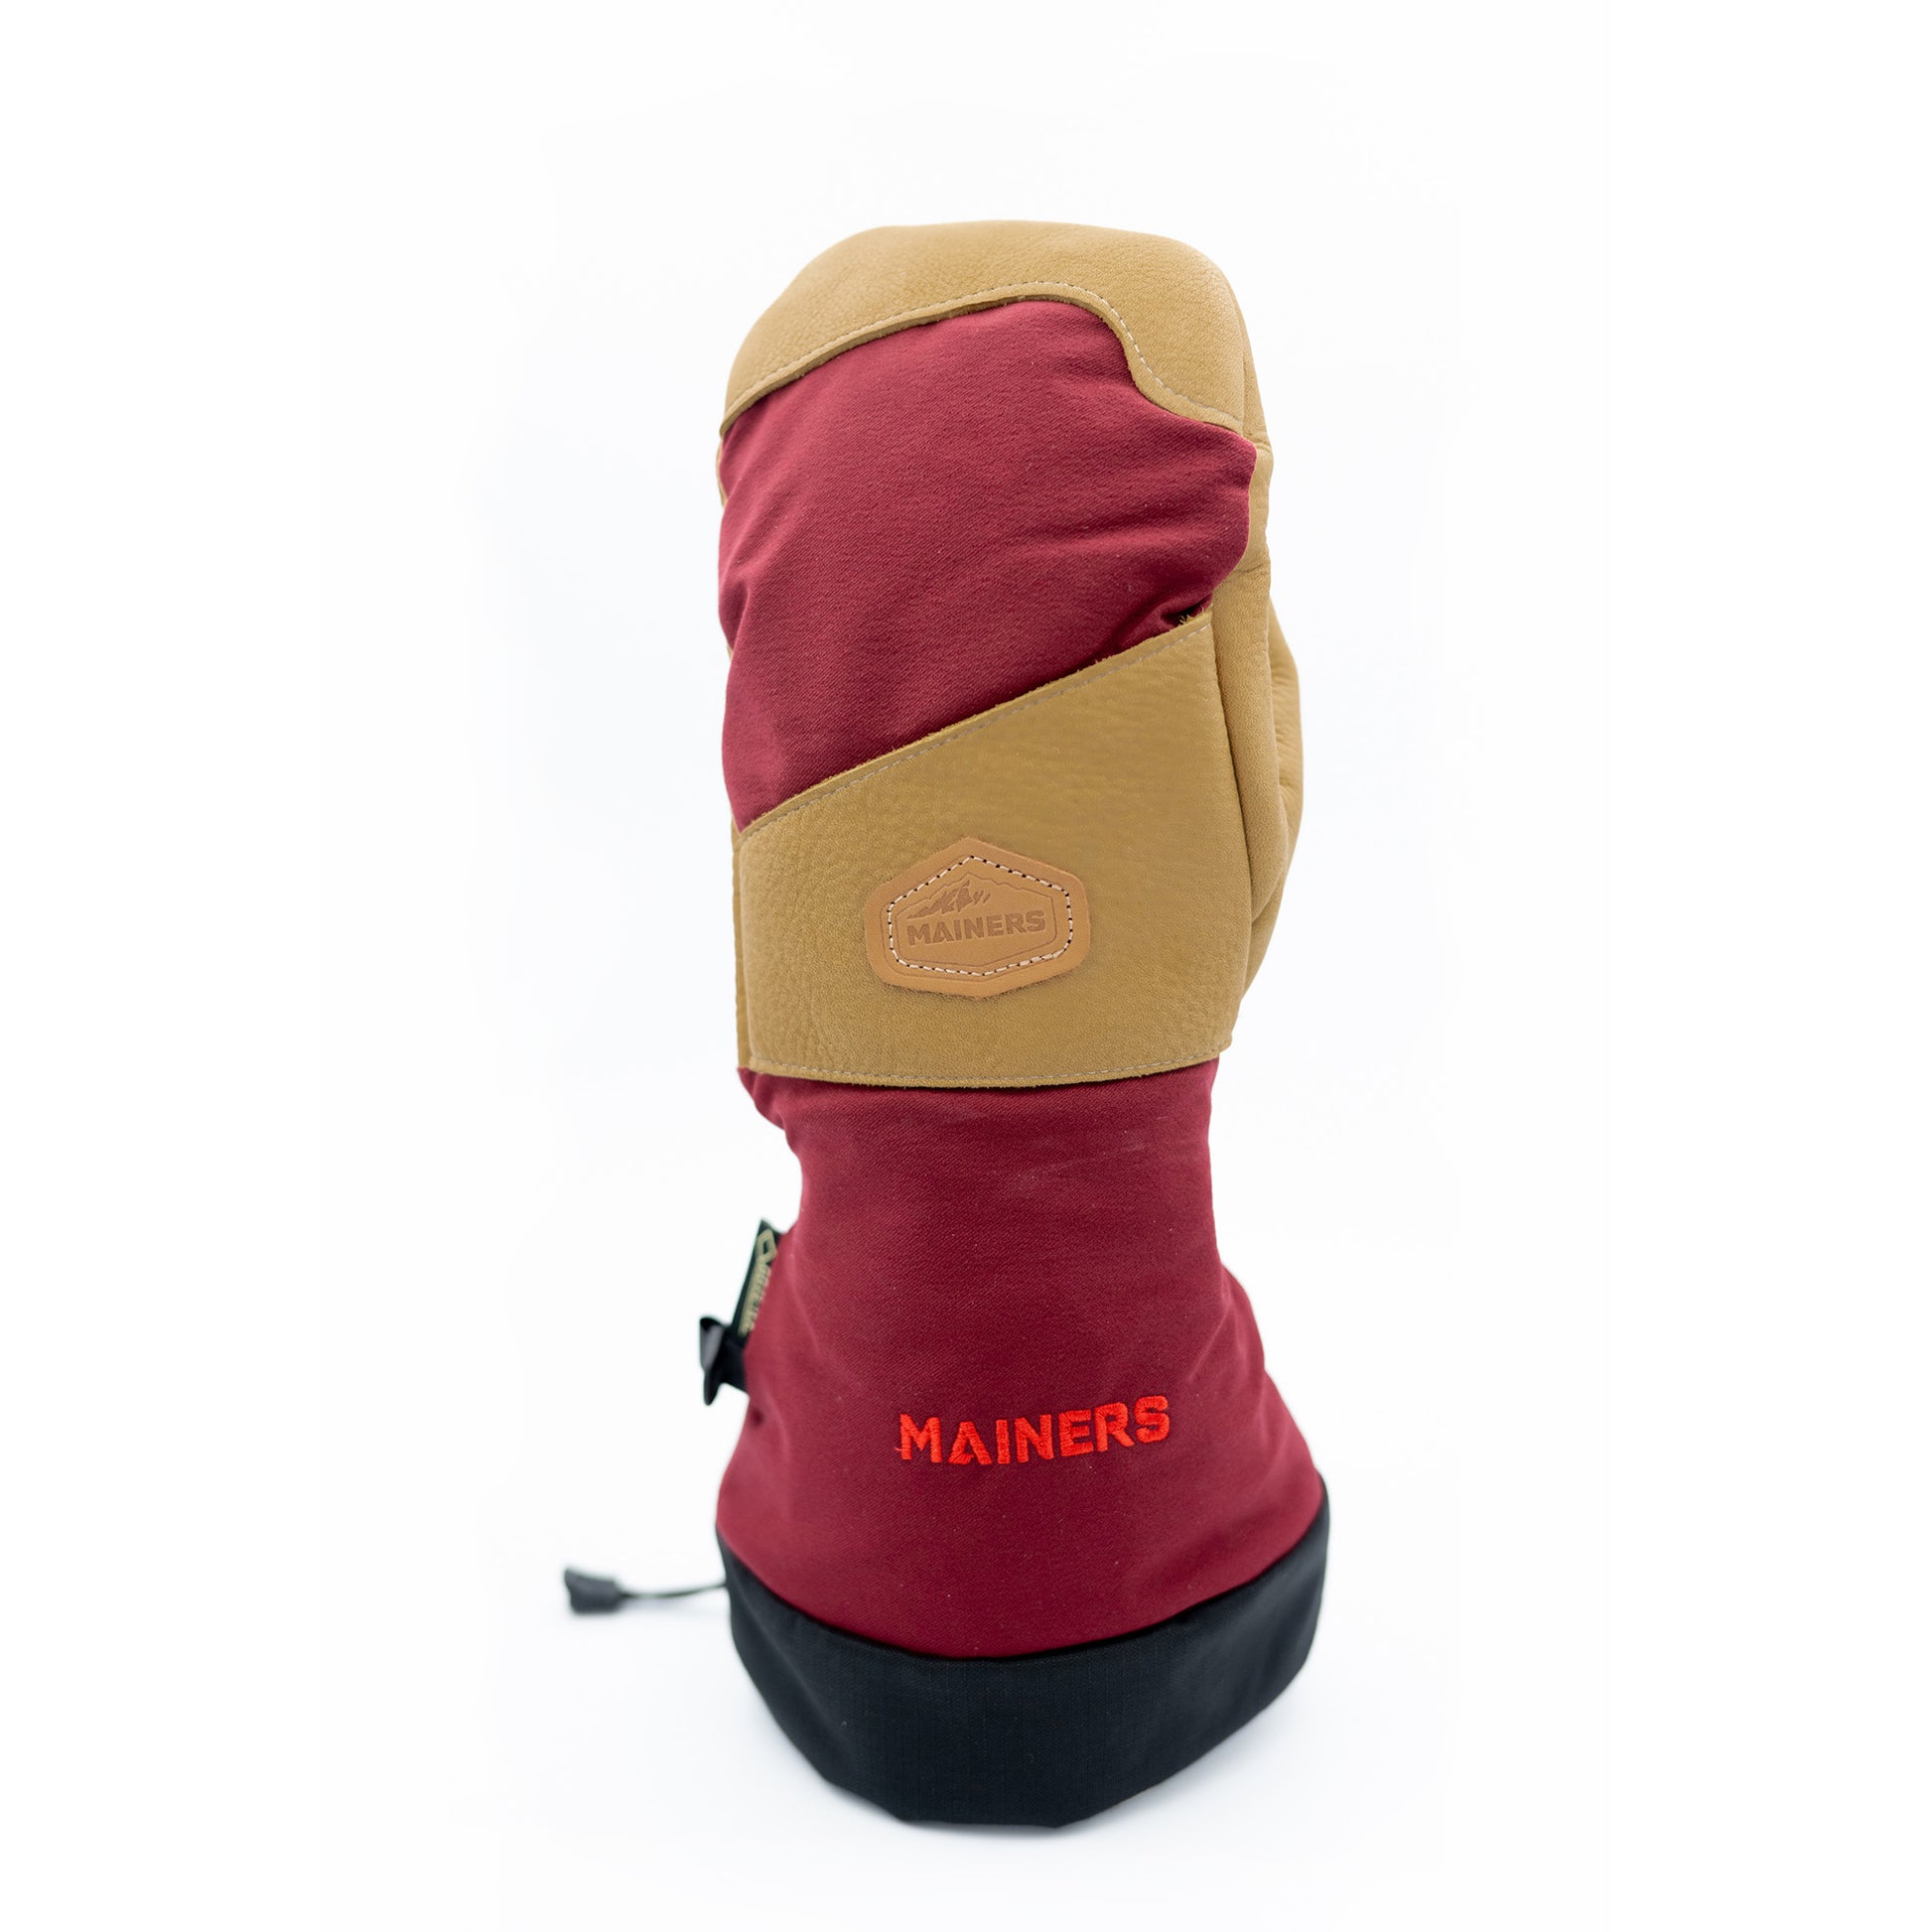 Mainers Mitts Red/Sand / Large